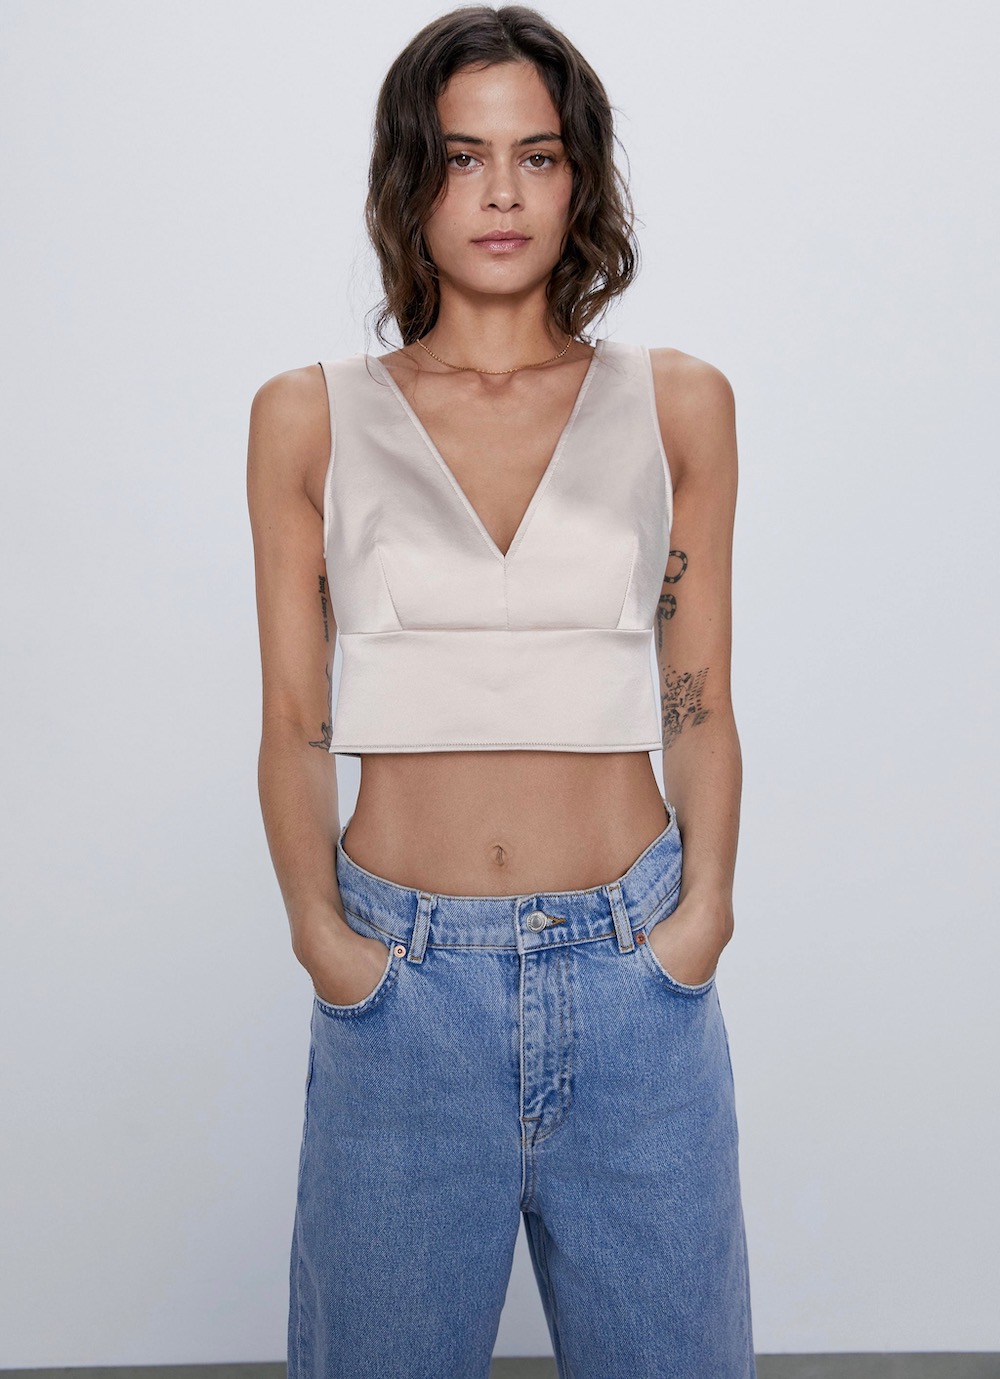 Bra Tops Are the New Crop Tops for Spring - theFashionSpot